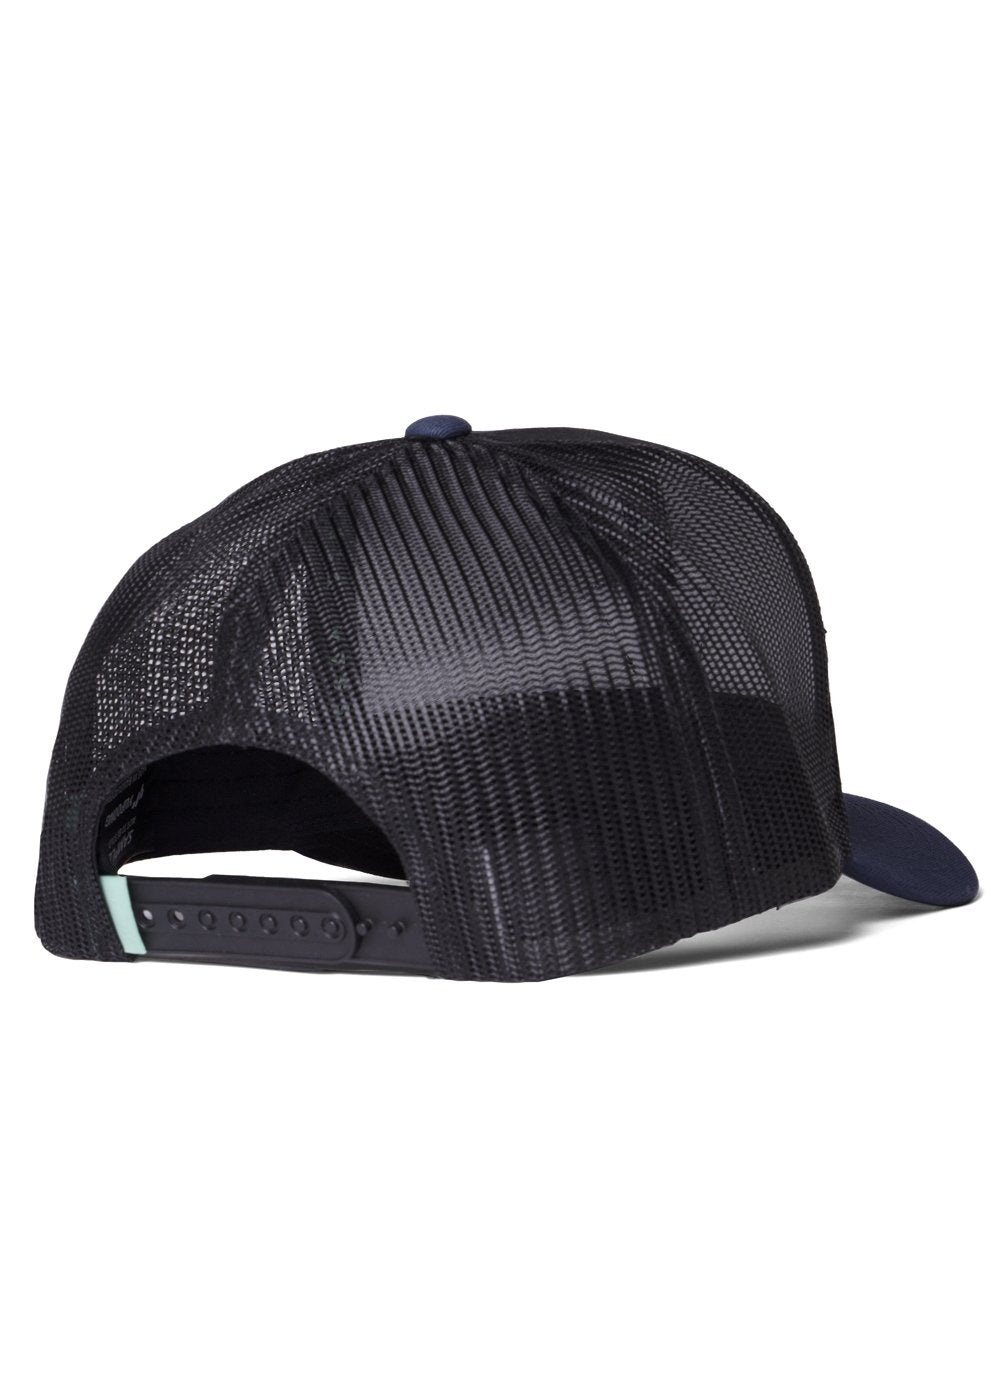 Solid Sets Eco Trucker Hat, DN2